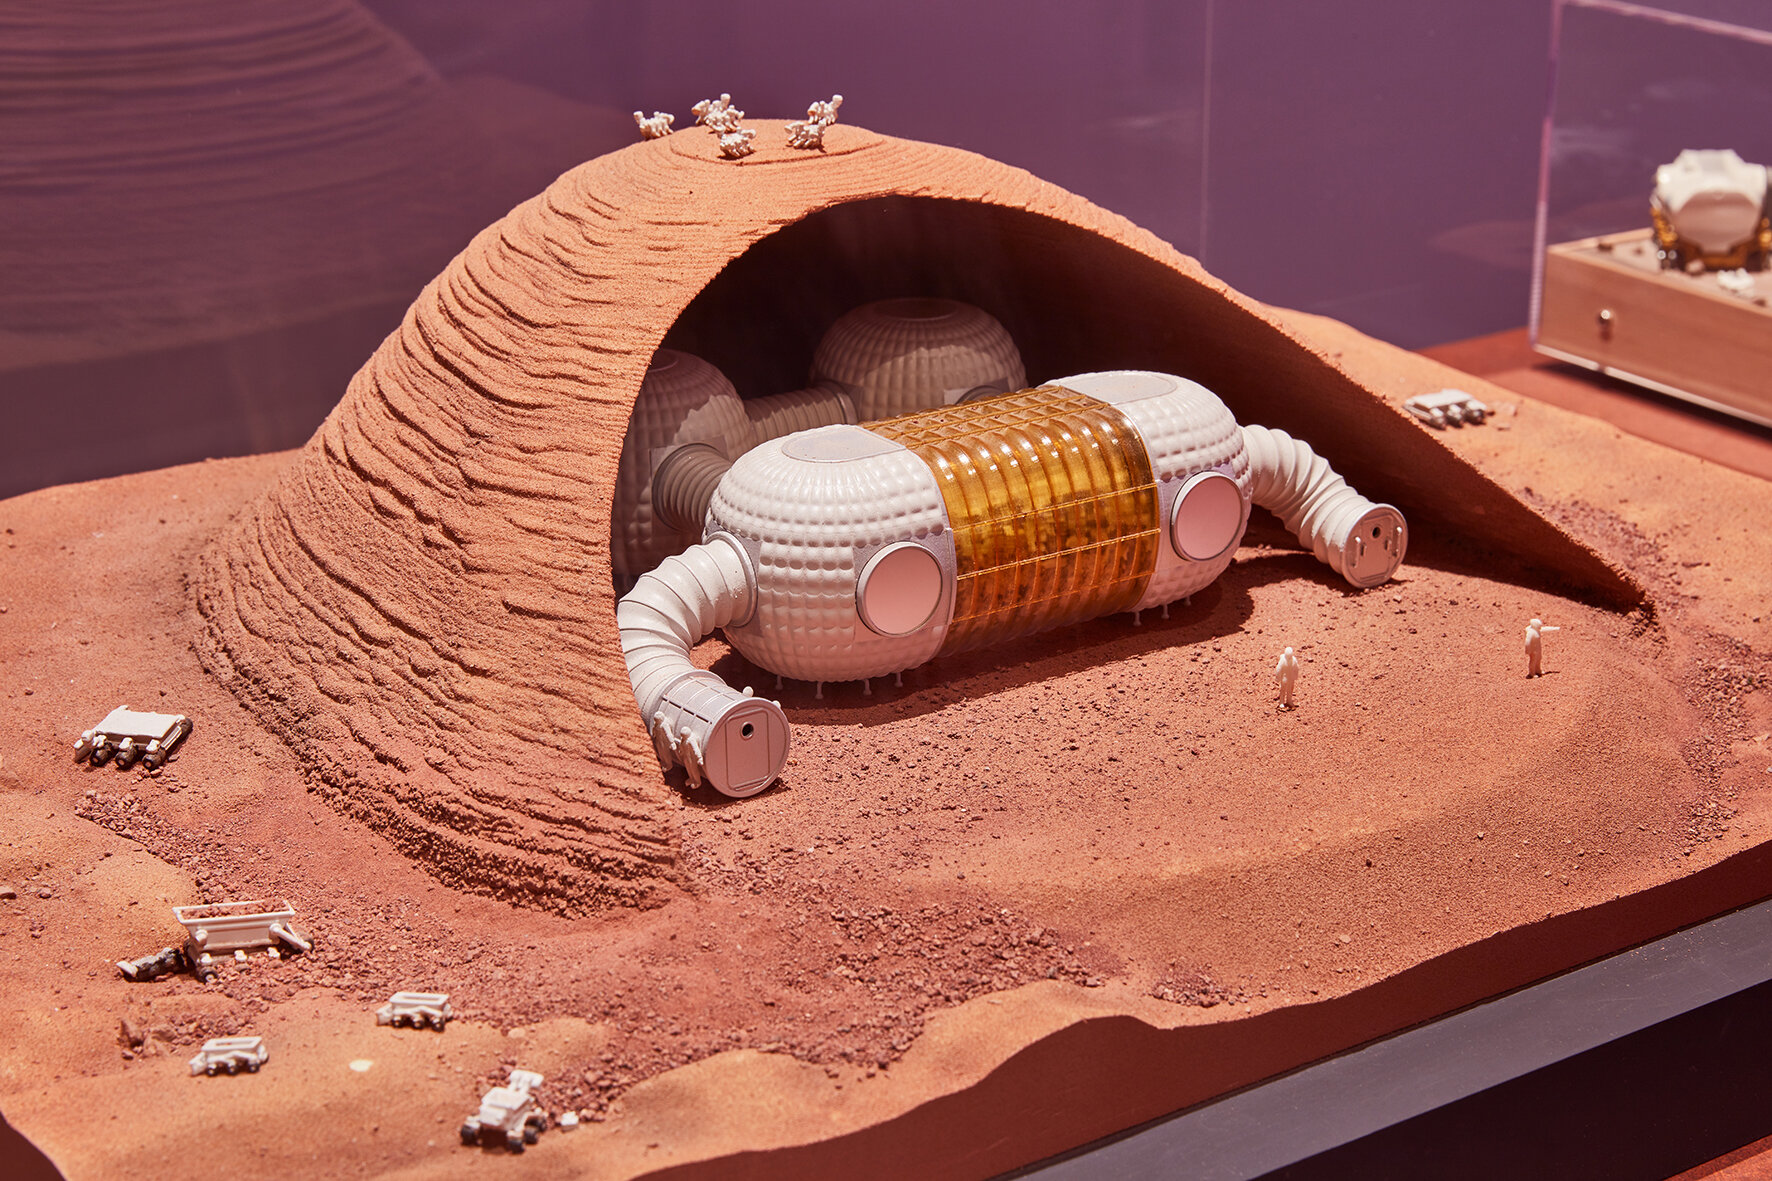 Moving to Mars, the Design Museum 13_Sml.jpg